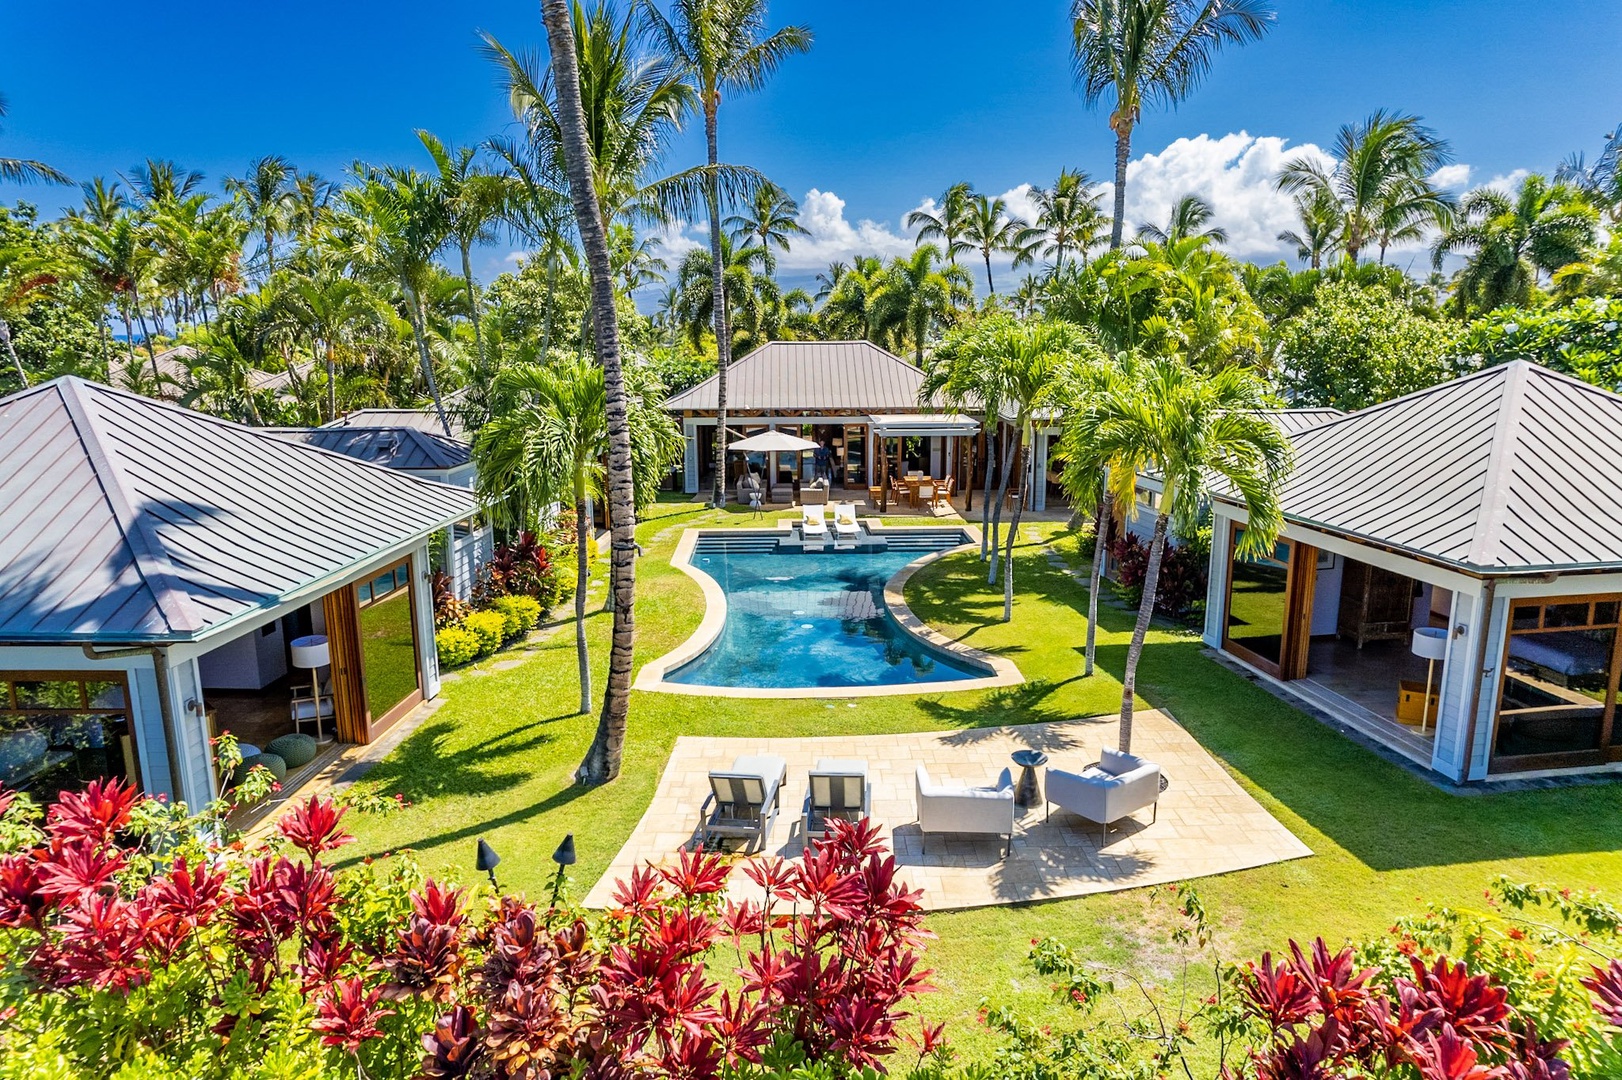 Kamuela Vacation Rentals, 3BD Na Hale 3 at Pauoa Beach Club at Mauna Lani Resort - From above: primary bedroom to the right, entrance center top, surrounded by paradise